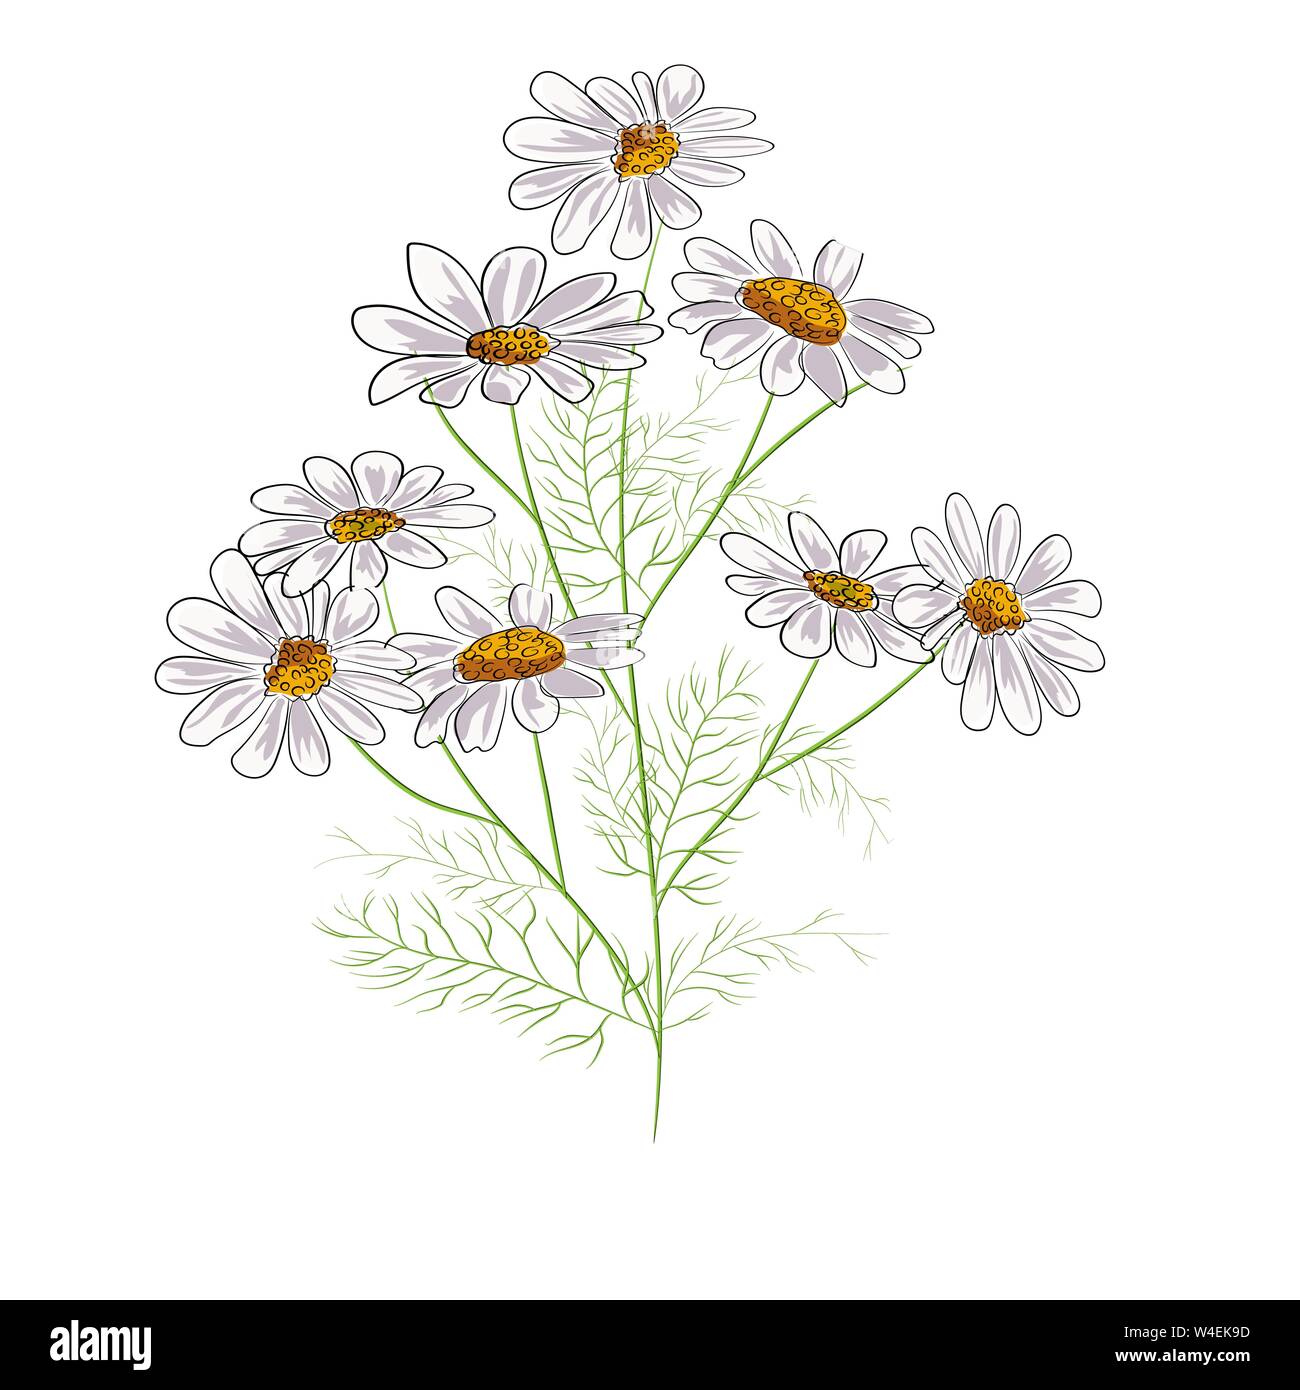 Download Daisy Flower Outline Daisy LIne Art Line Drawing chamomile outline  for free  Flower tattoo drawings Flower line drawings Sunflower drawing